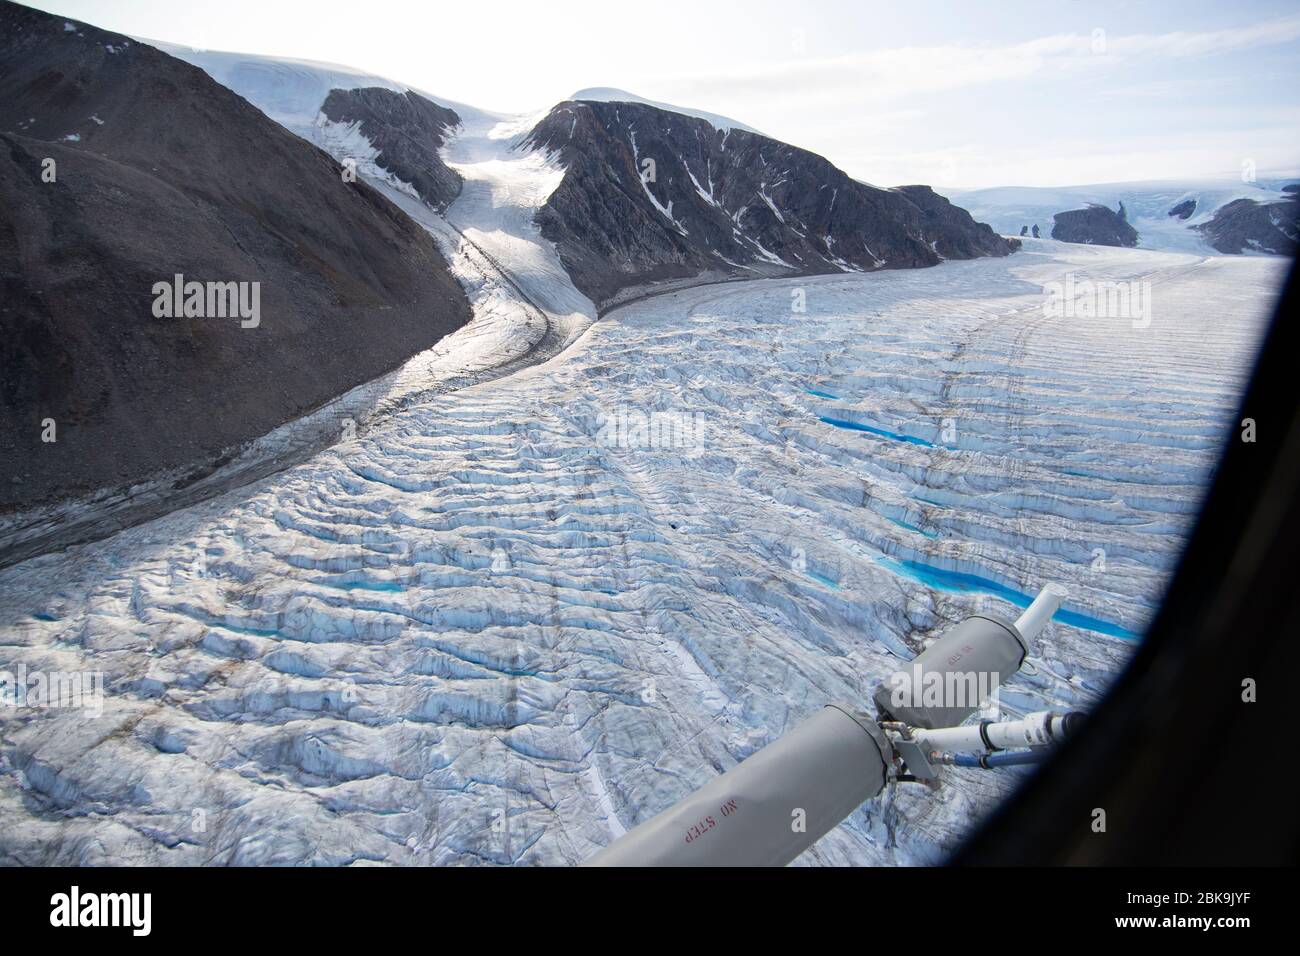 View from helicopter of melting glacier Stock Photo